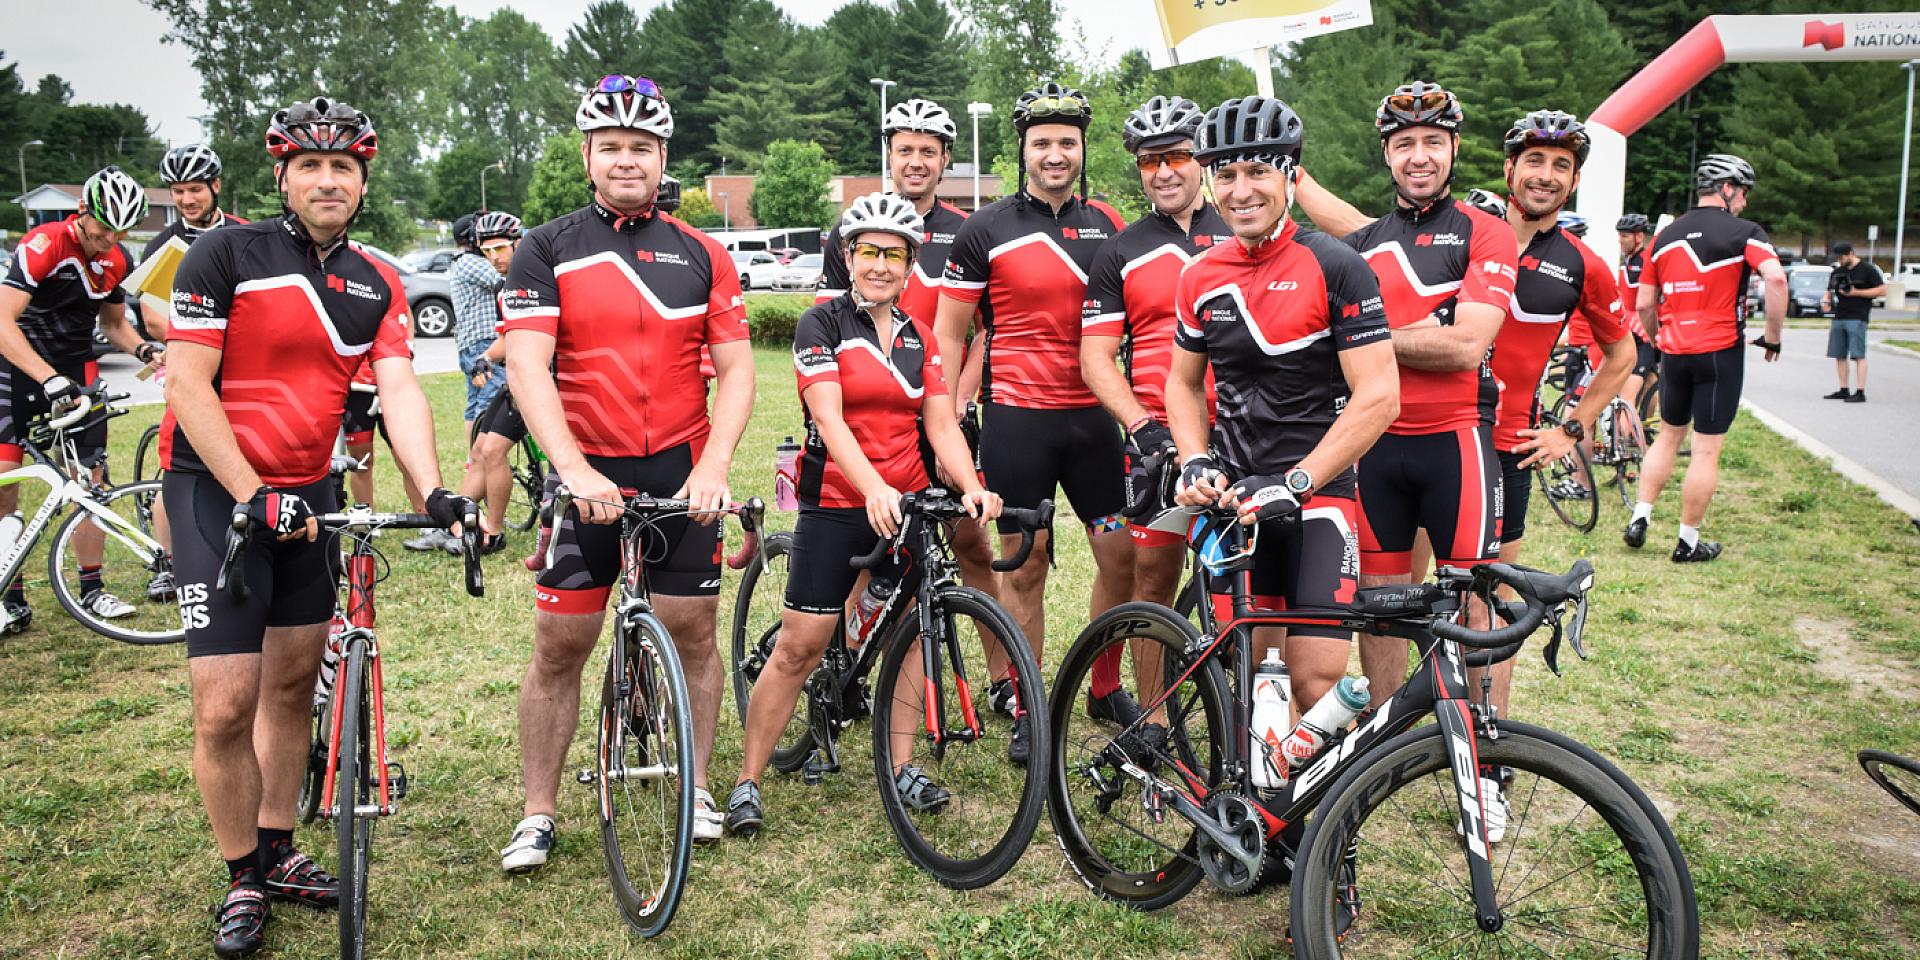 Cyclists at the 6TH Annual National Bank One for Youth Bicycle Tour